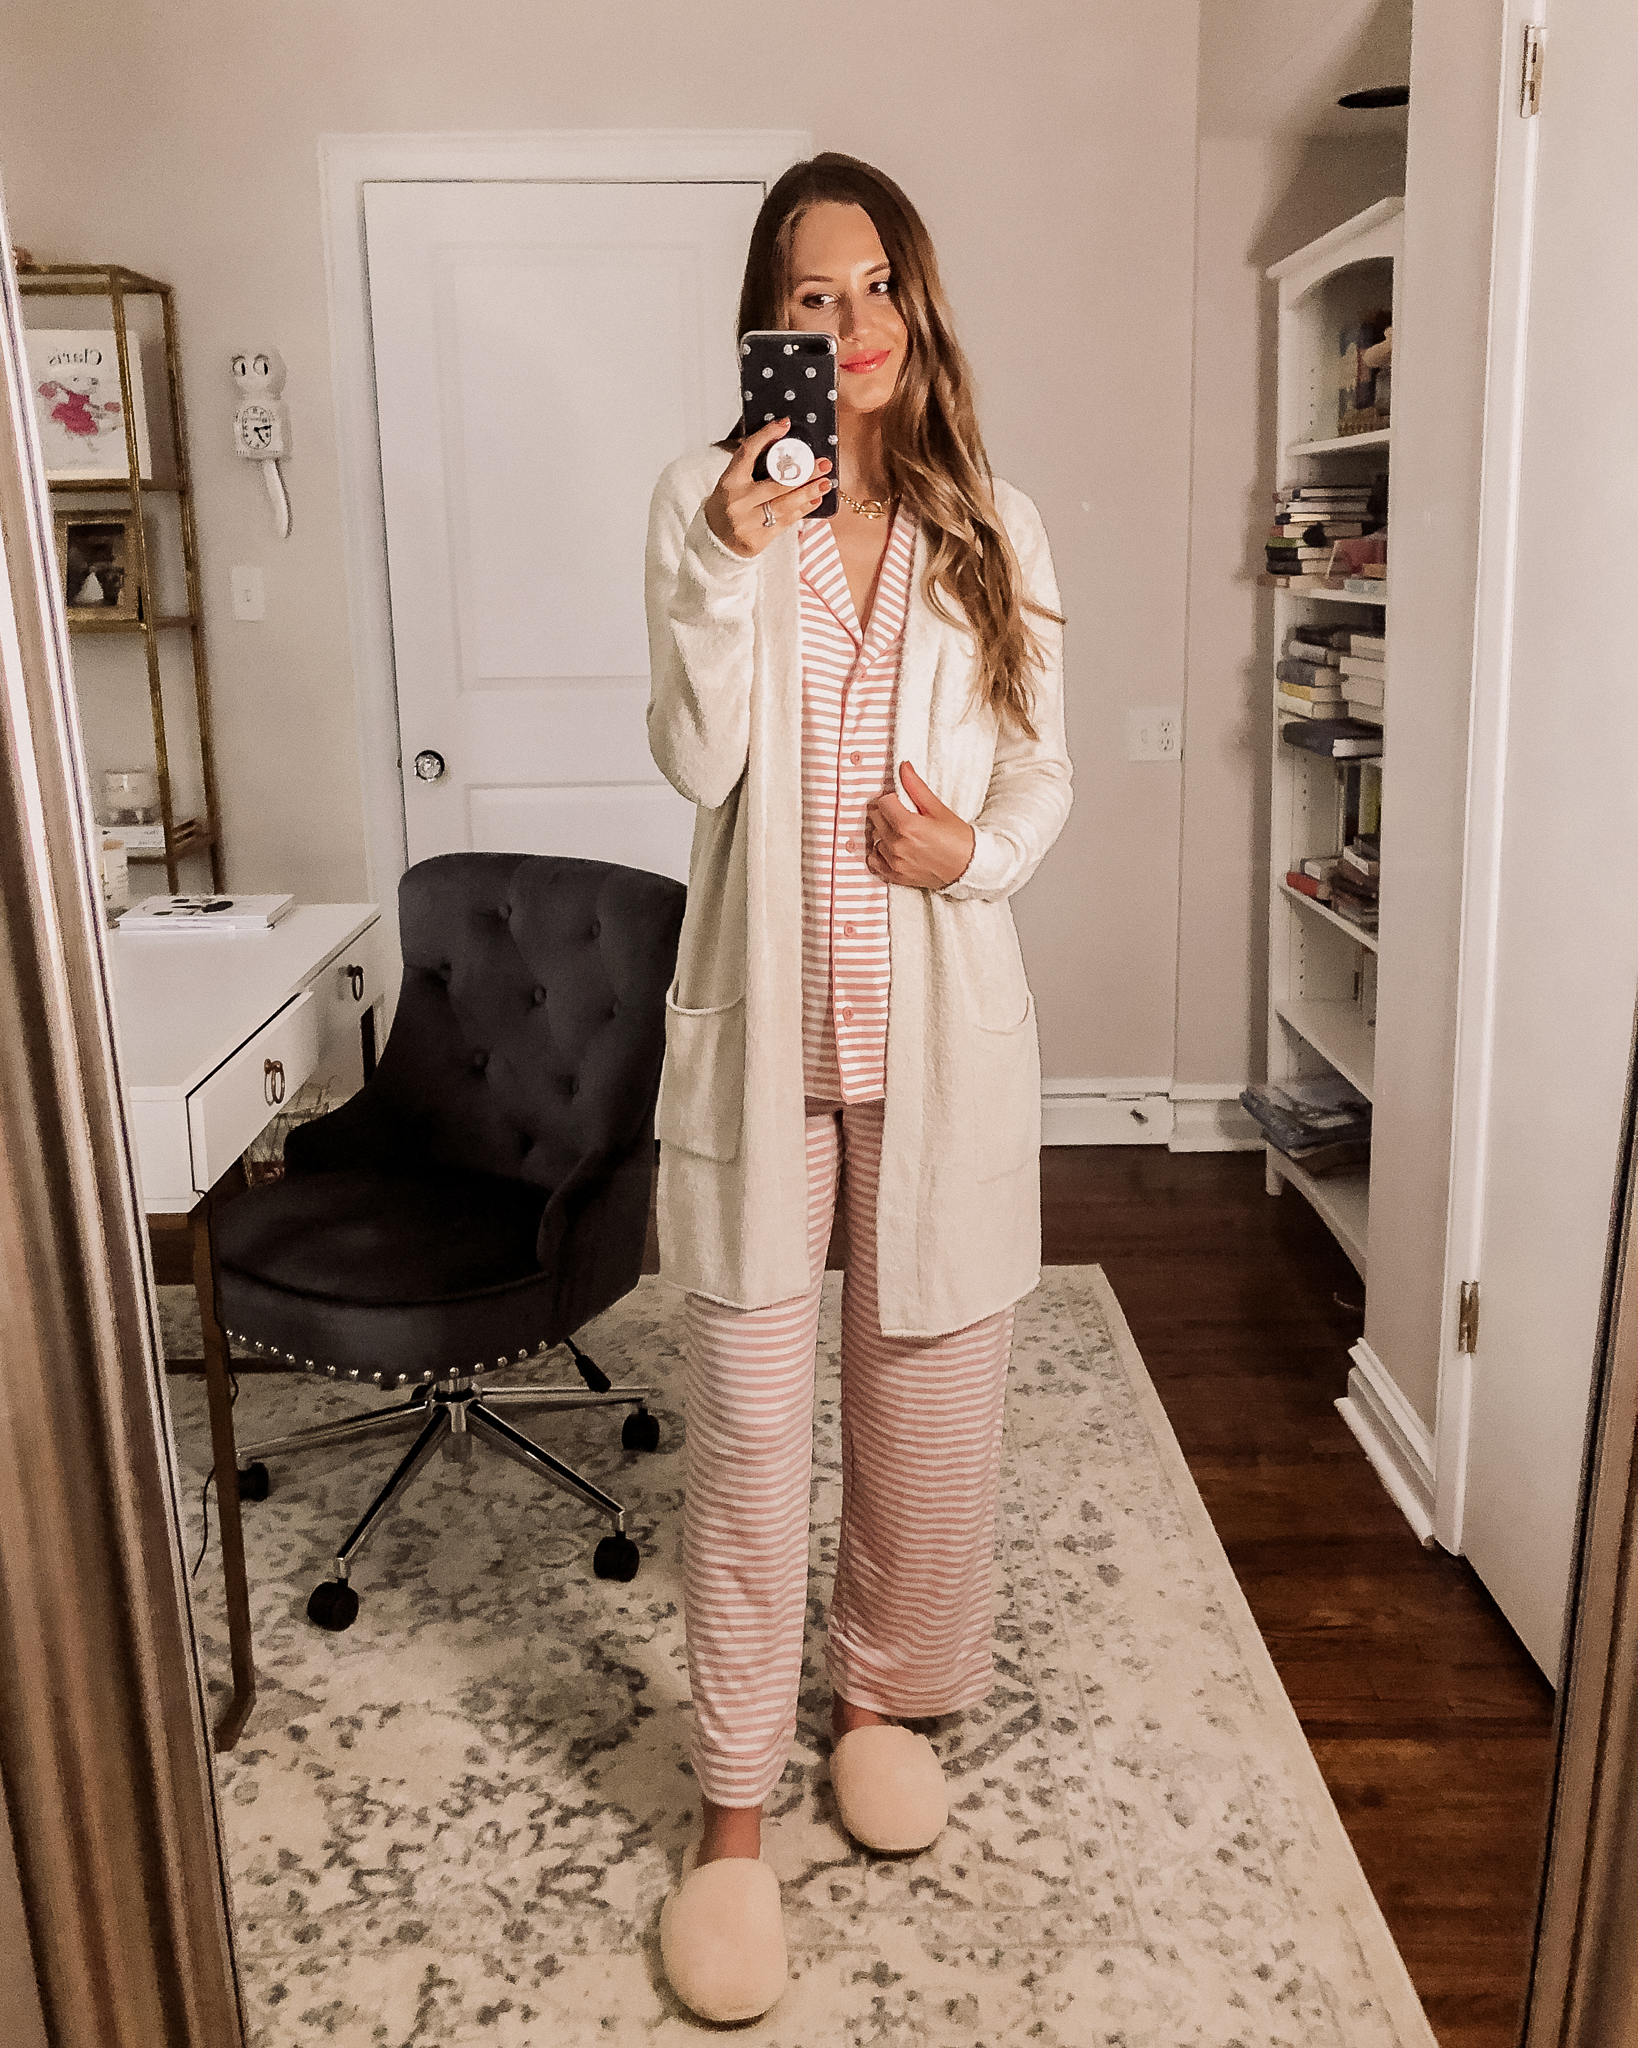 2020 Nordstrom Anniversary Sale Outfits